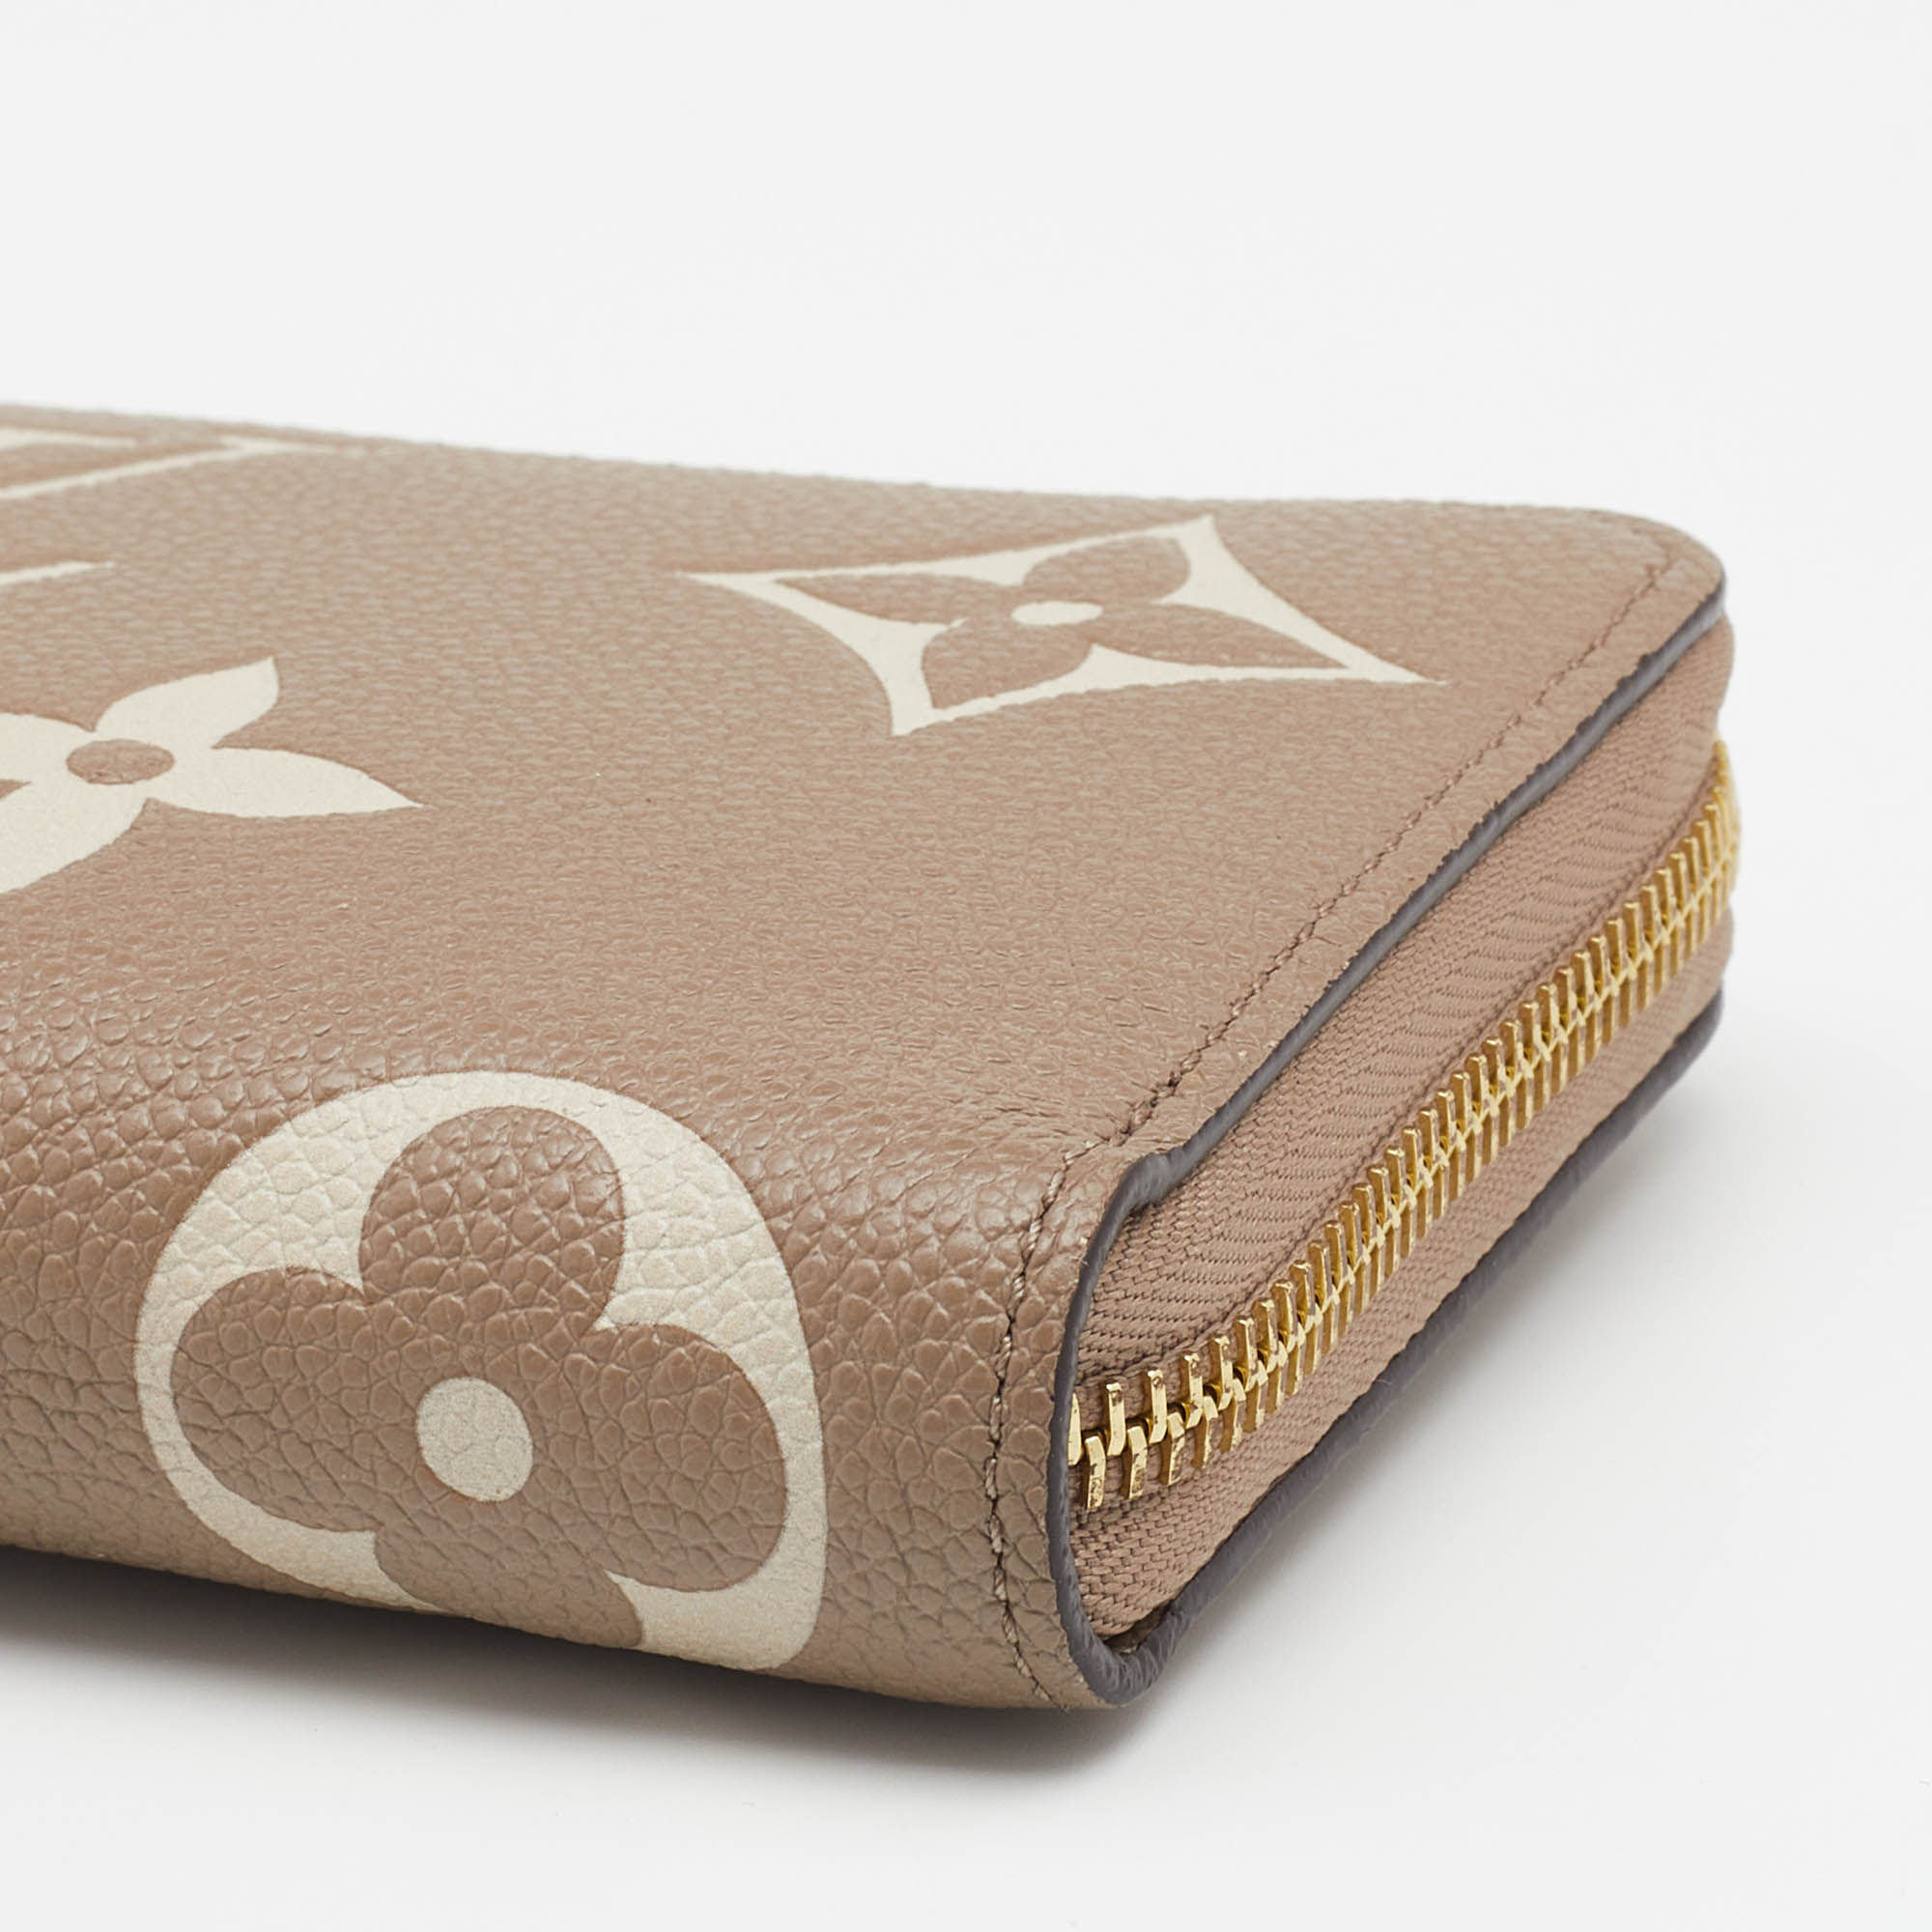 Zippy Wallet Bicolor Monogram Empreinte Leather - Wallets and Small Leather  Goods